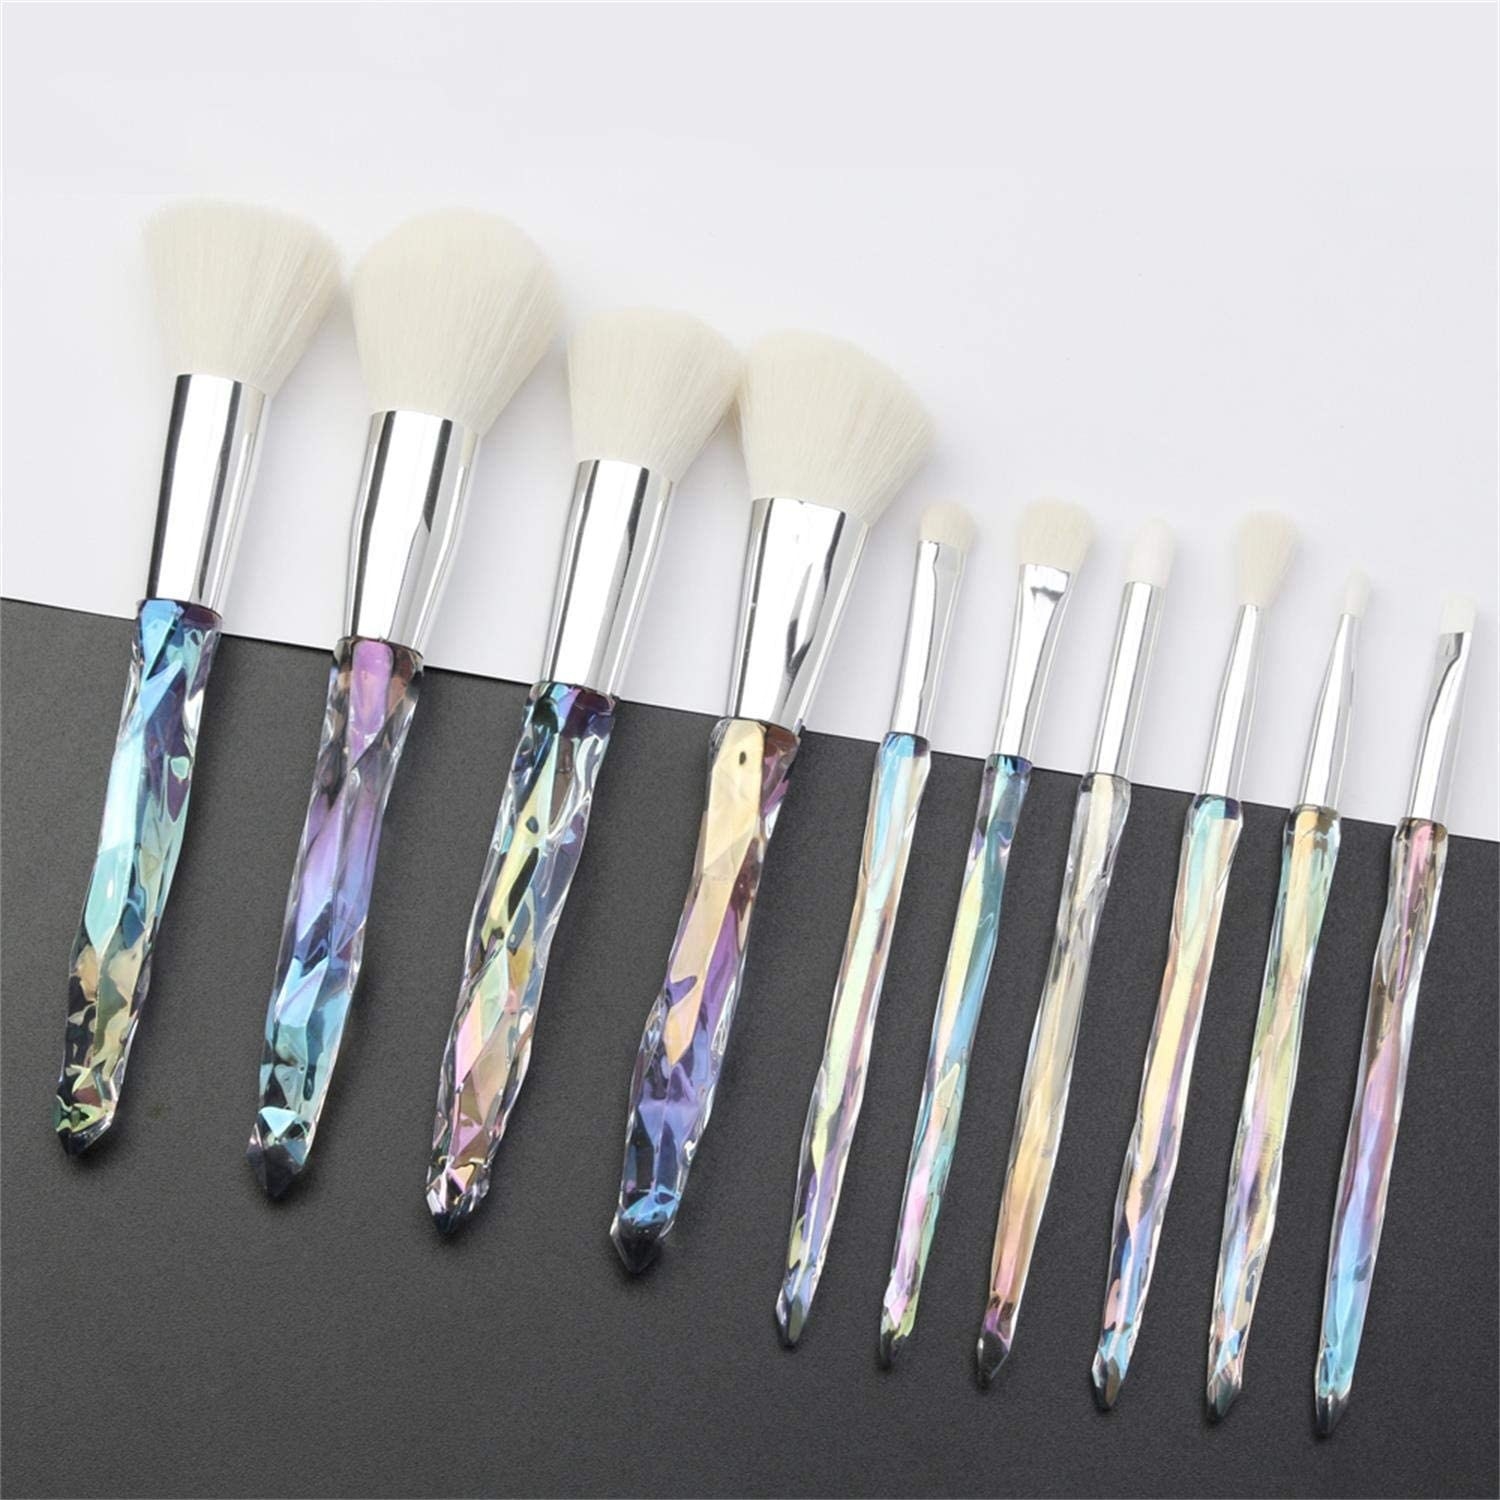 a set of makeup brushes with opalescent faux crystal handles